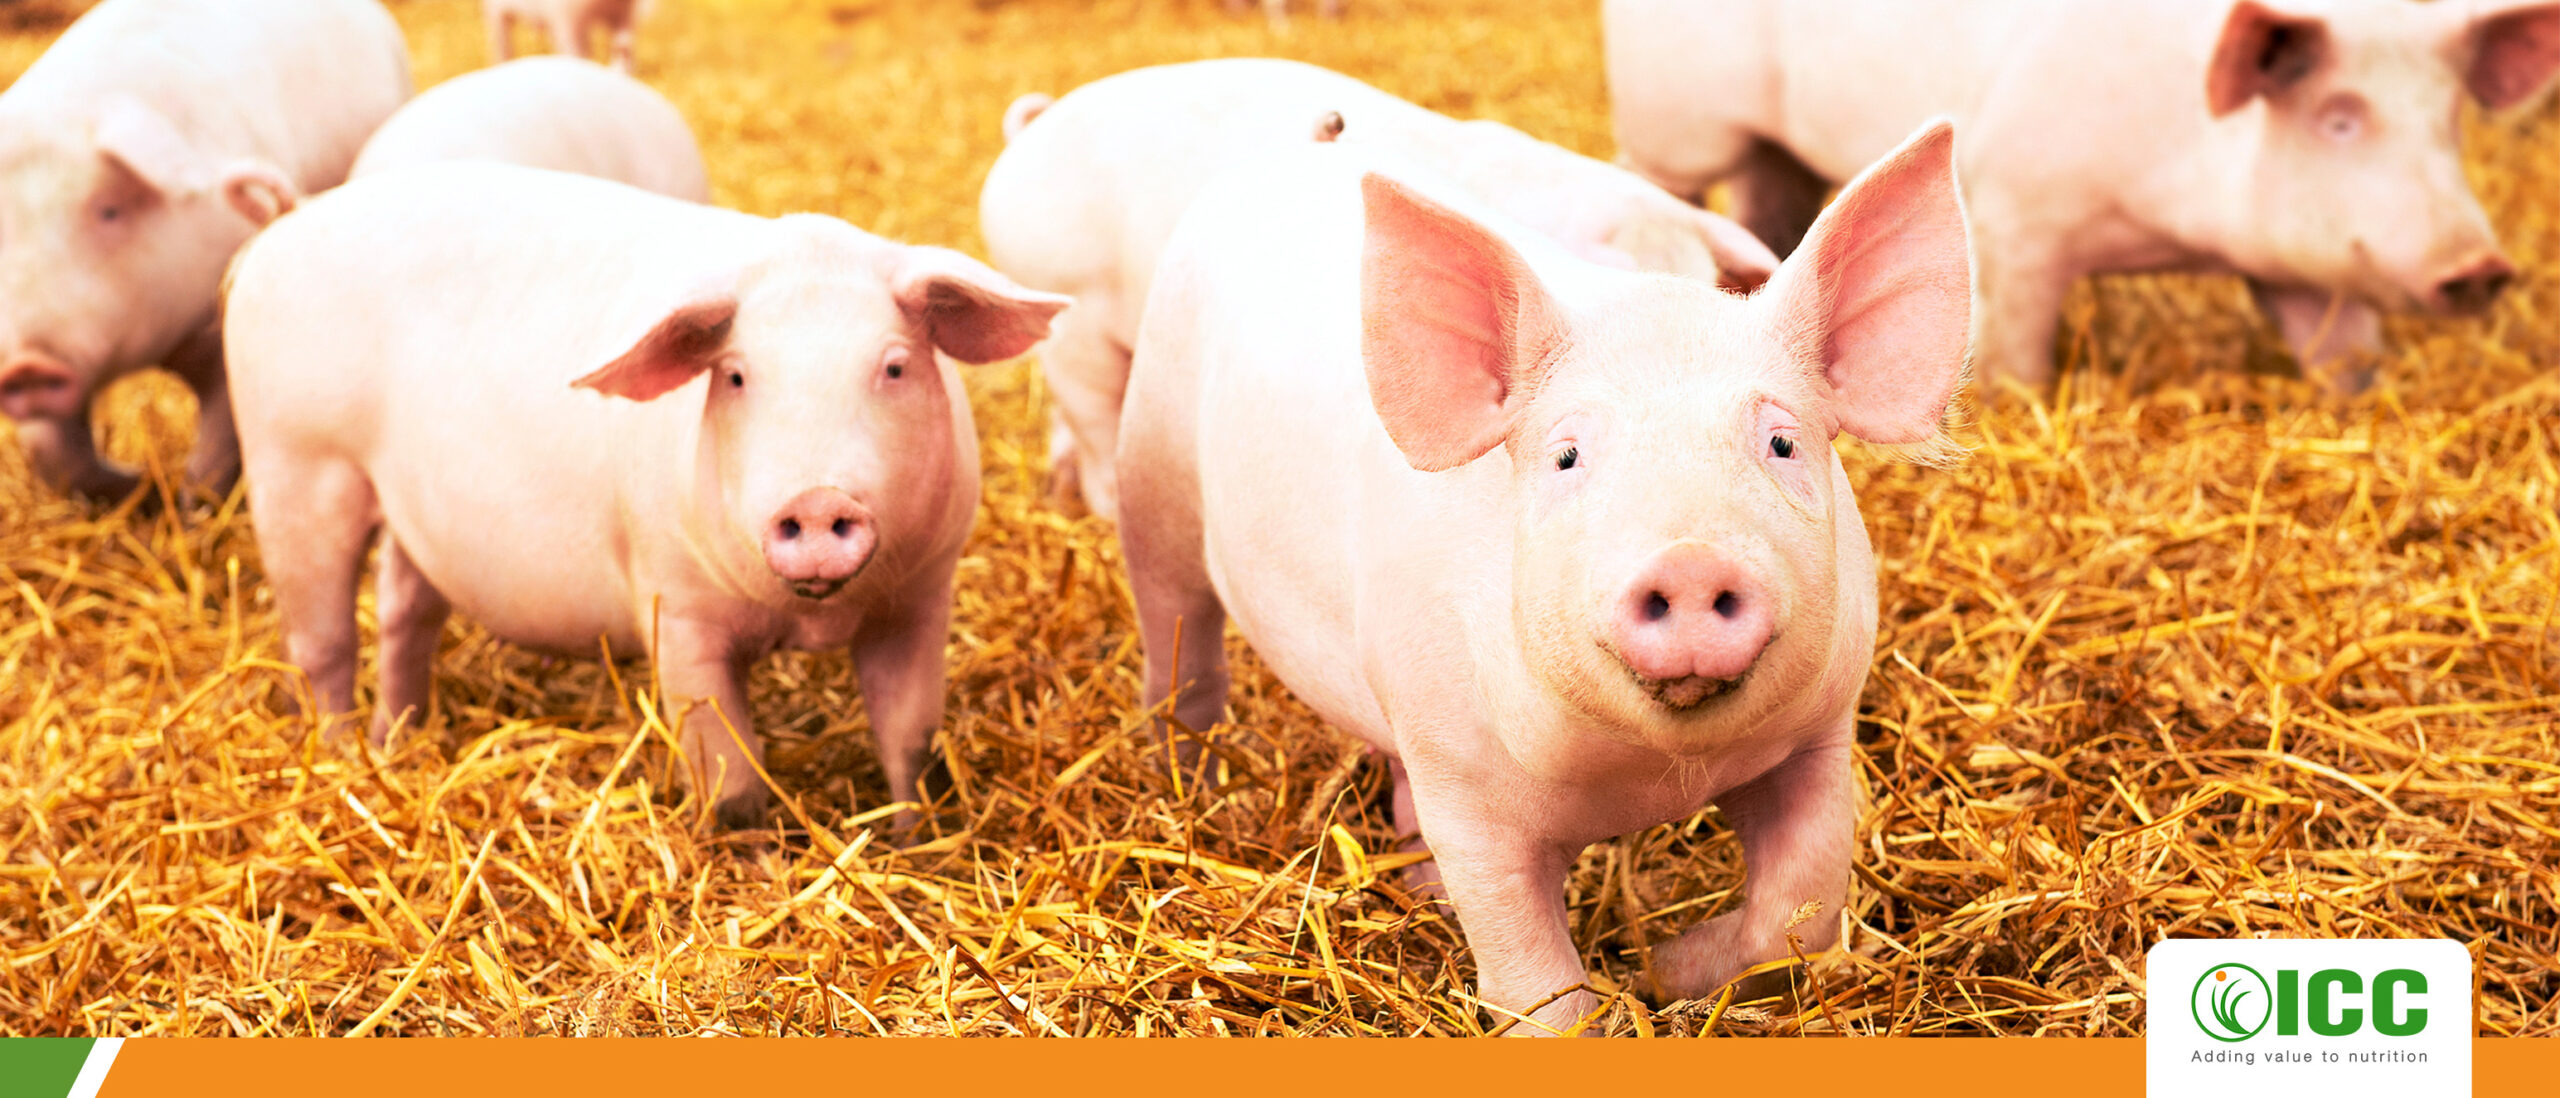 What we gain by (not) using therapeutic zinc oxide in pig farming